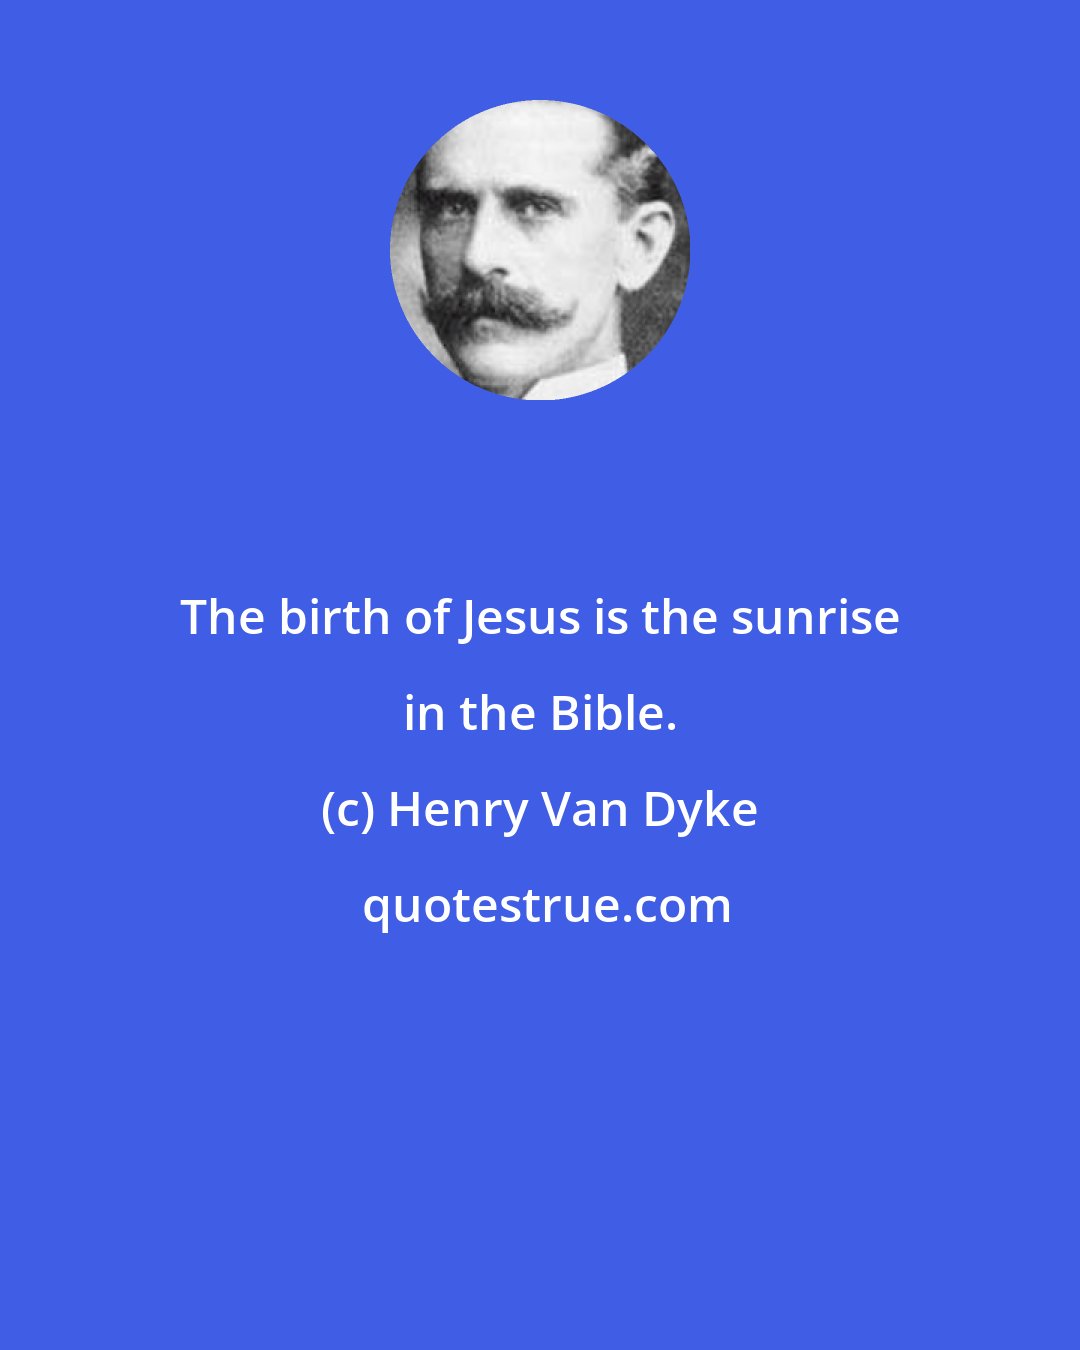 Henry Van Dyke: The birth of Jesus is the sunrise in the Bible.